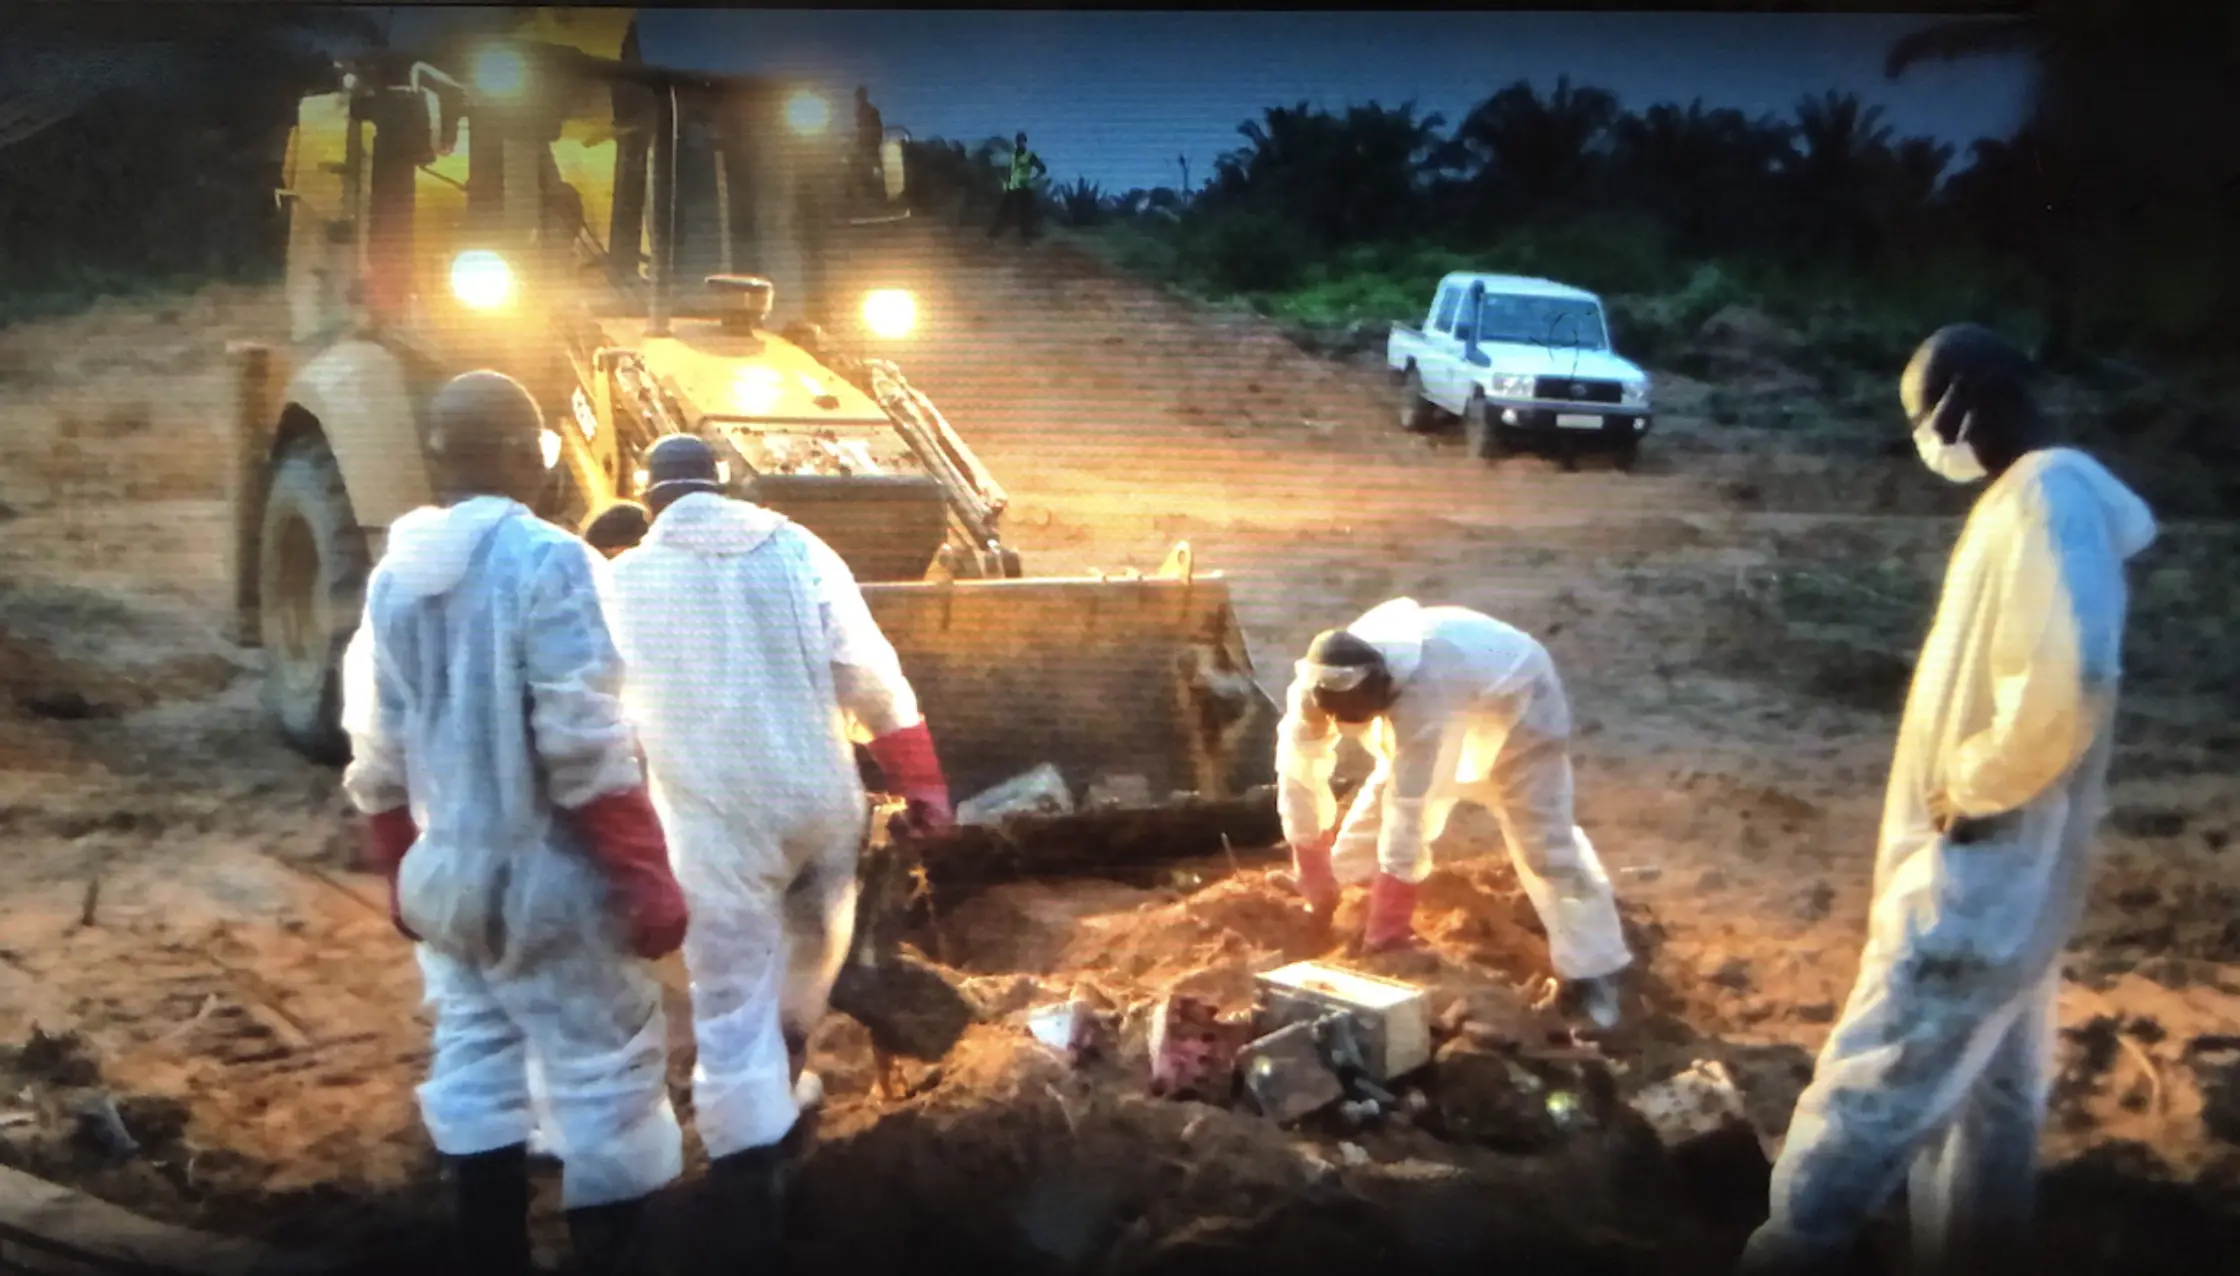 The delegation buried the wastes directly on the ground